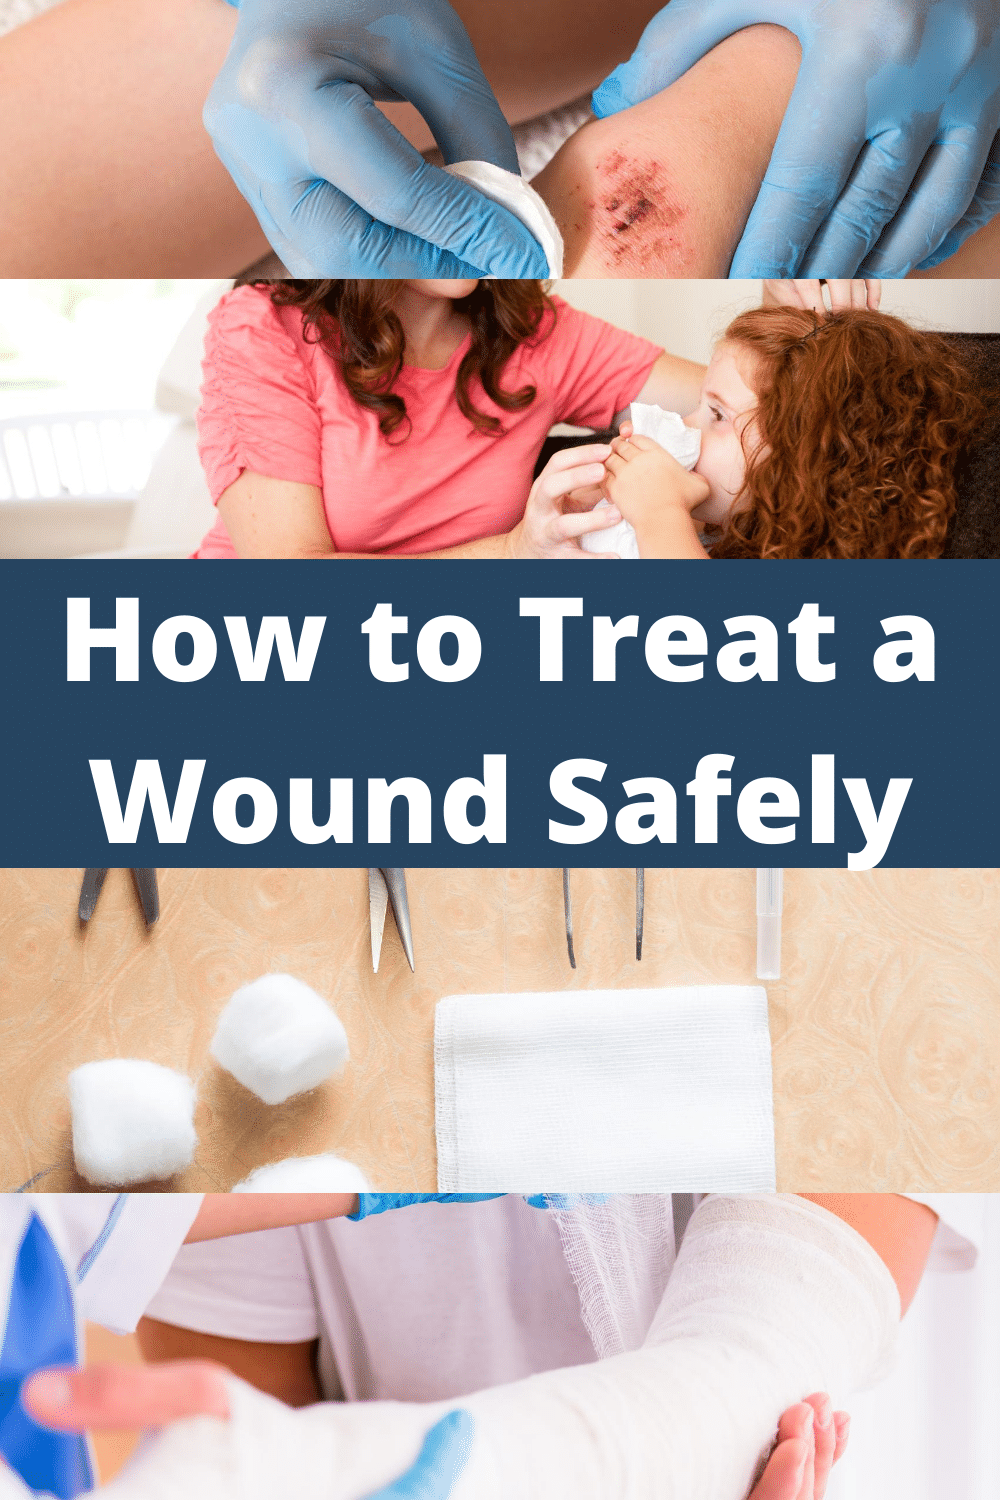 How to Treat a Wound Safely